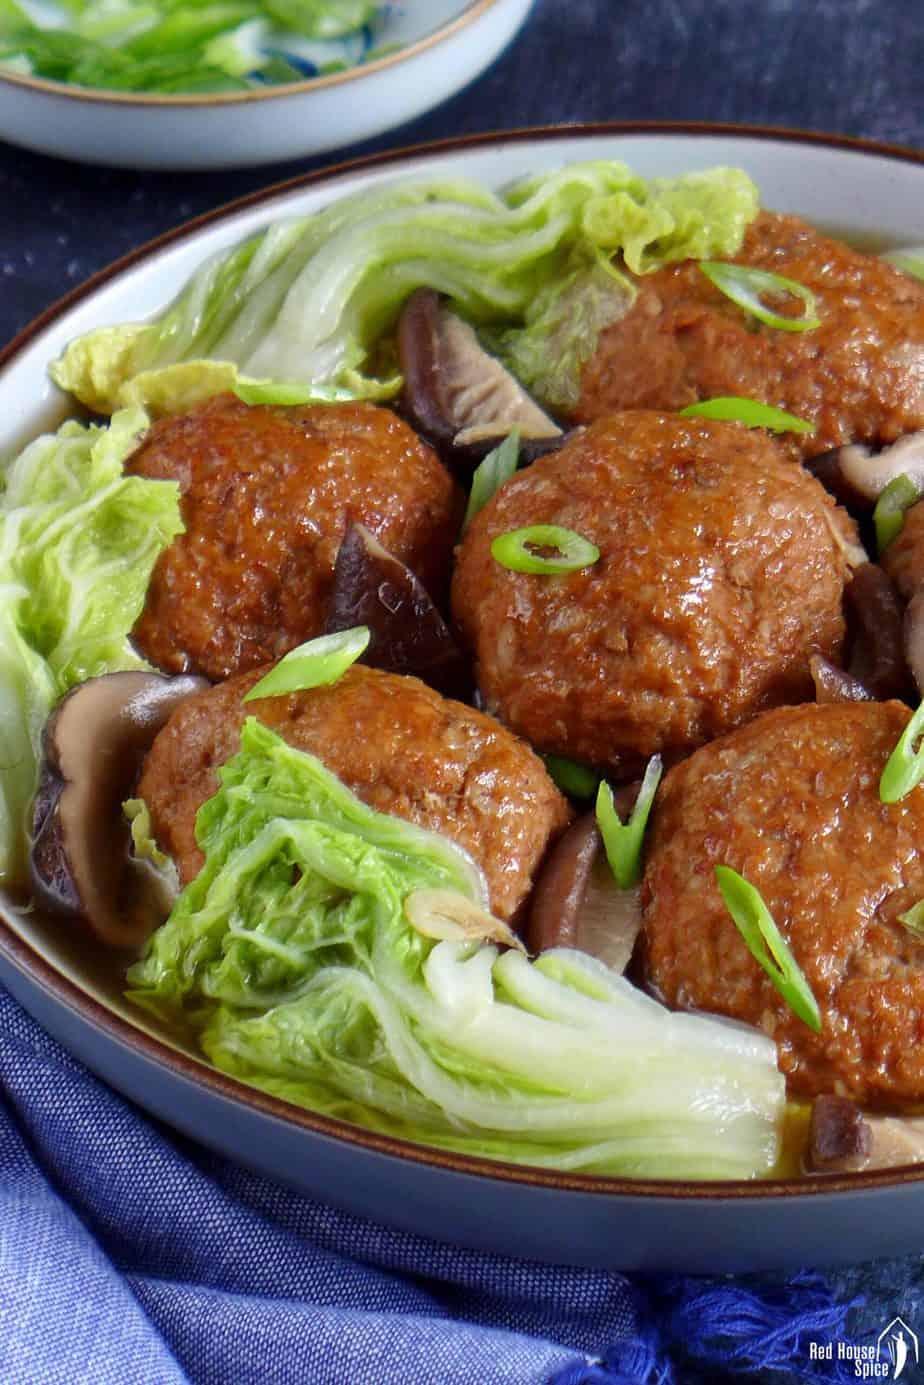 Giant lion's head pork meatballs with Napa cabbage